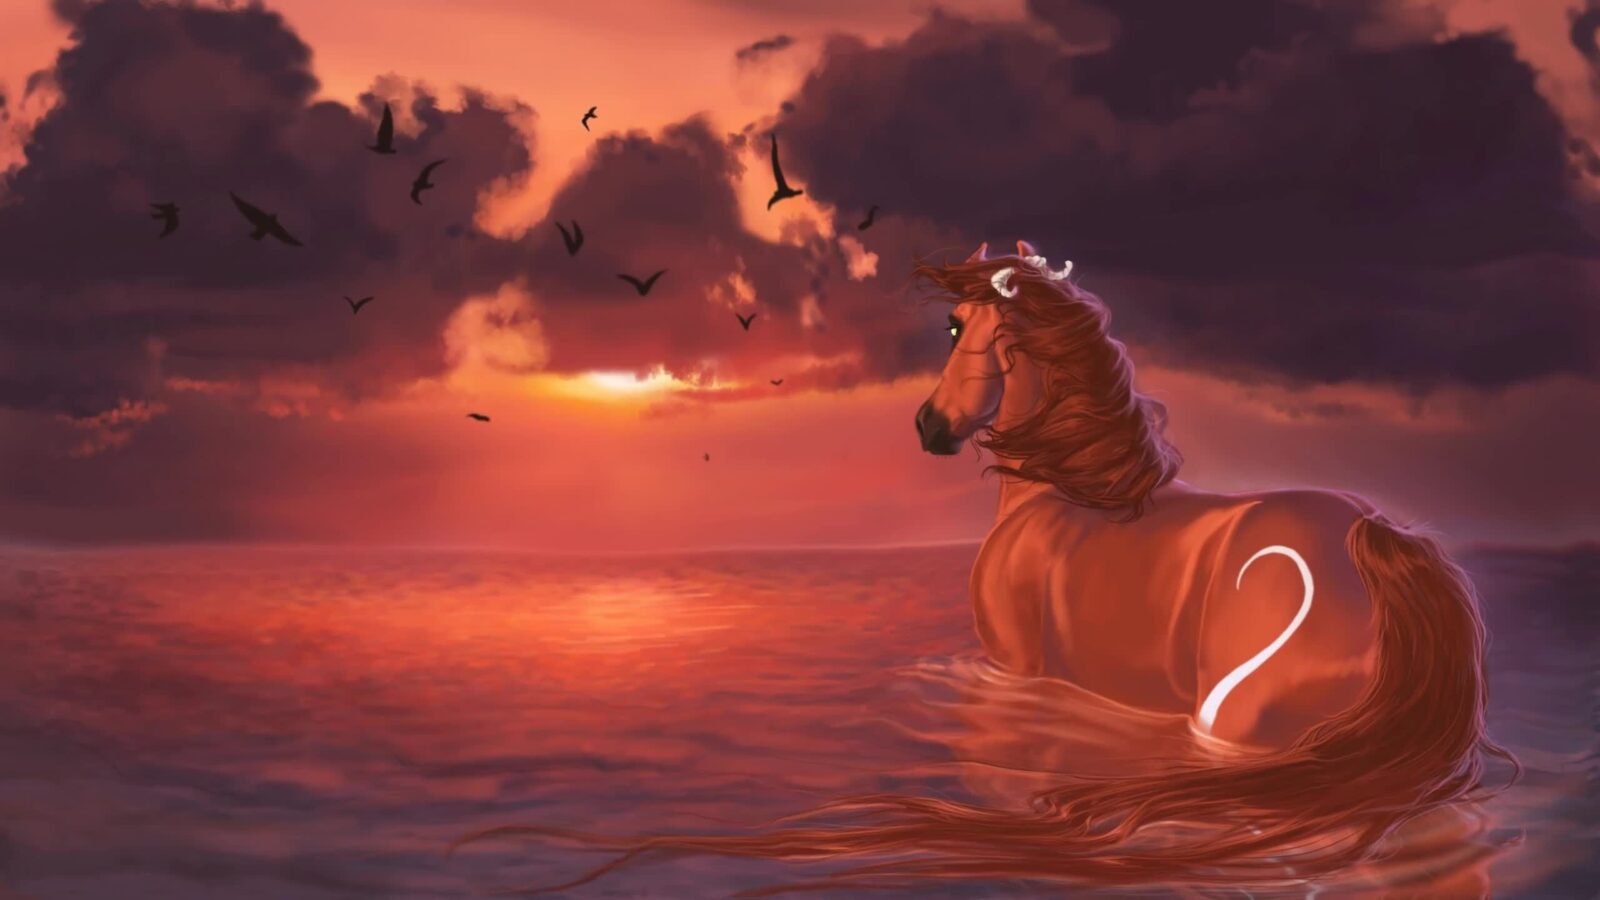 Animated Wallpapers For Free : Horse Animated Water 2k Wallpapers